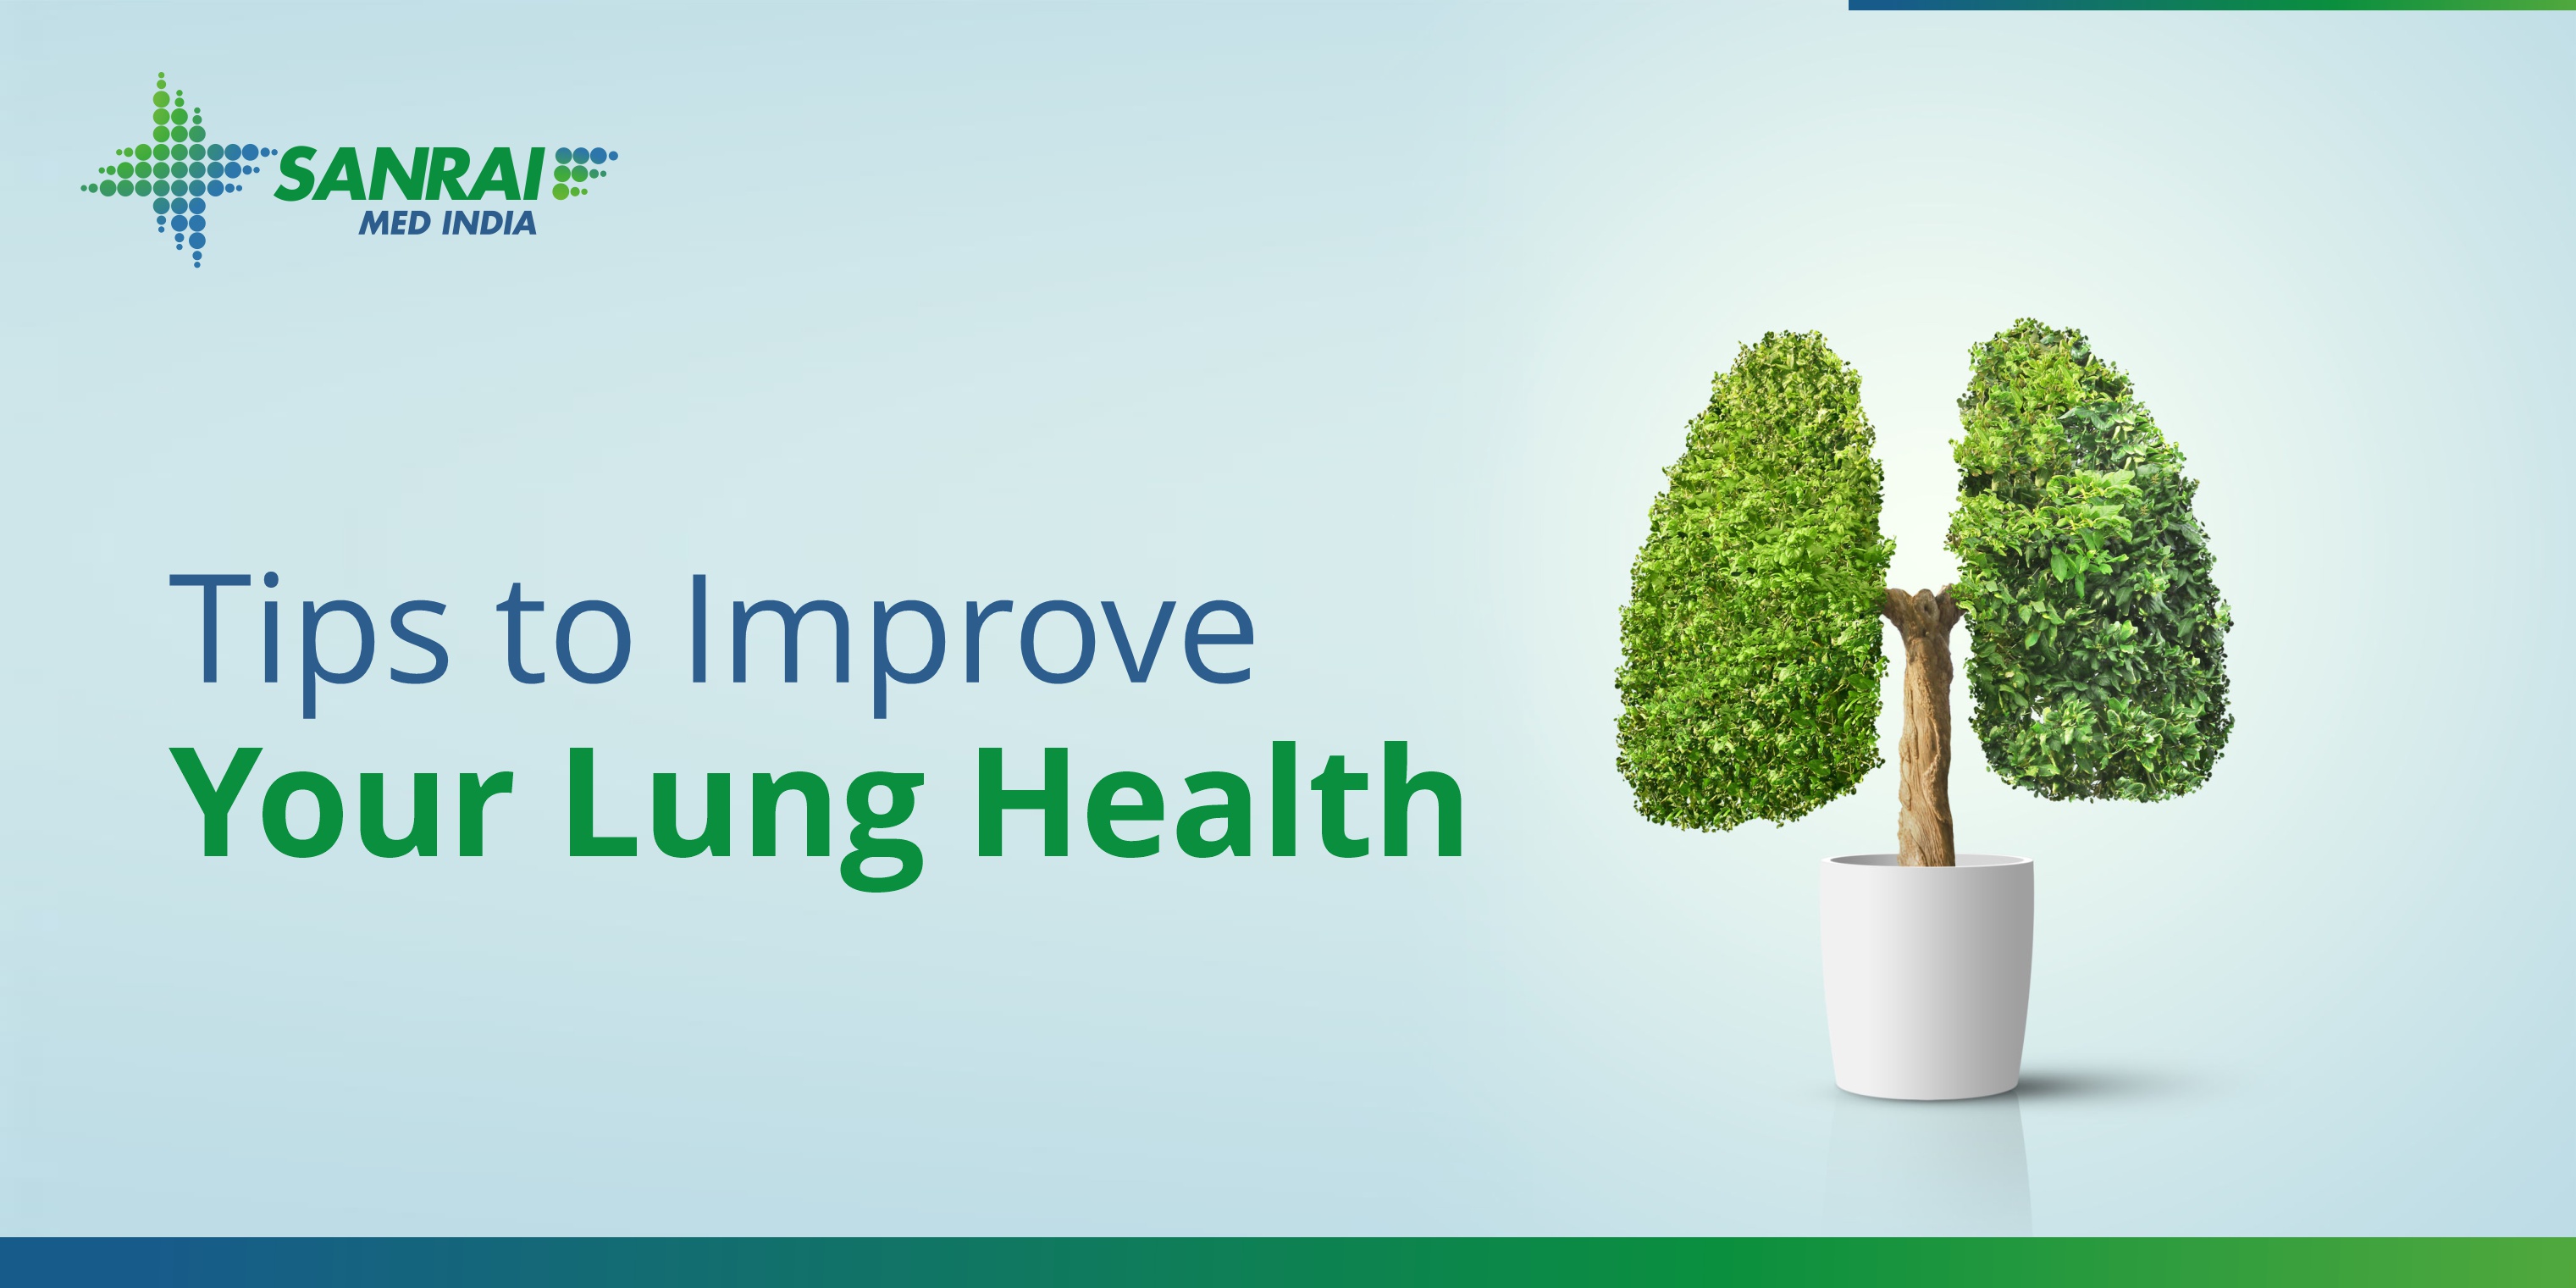 Tips to Improve Your Lung Health